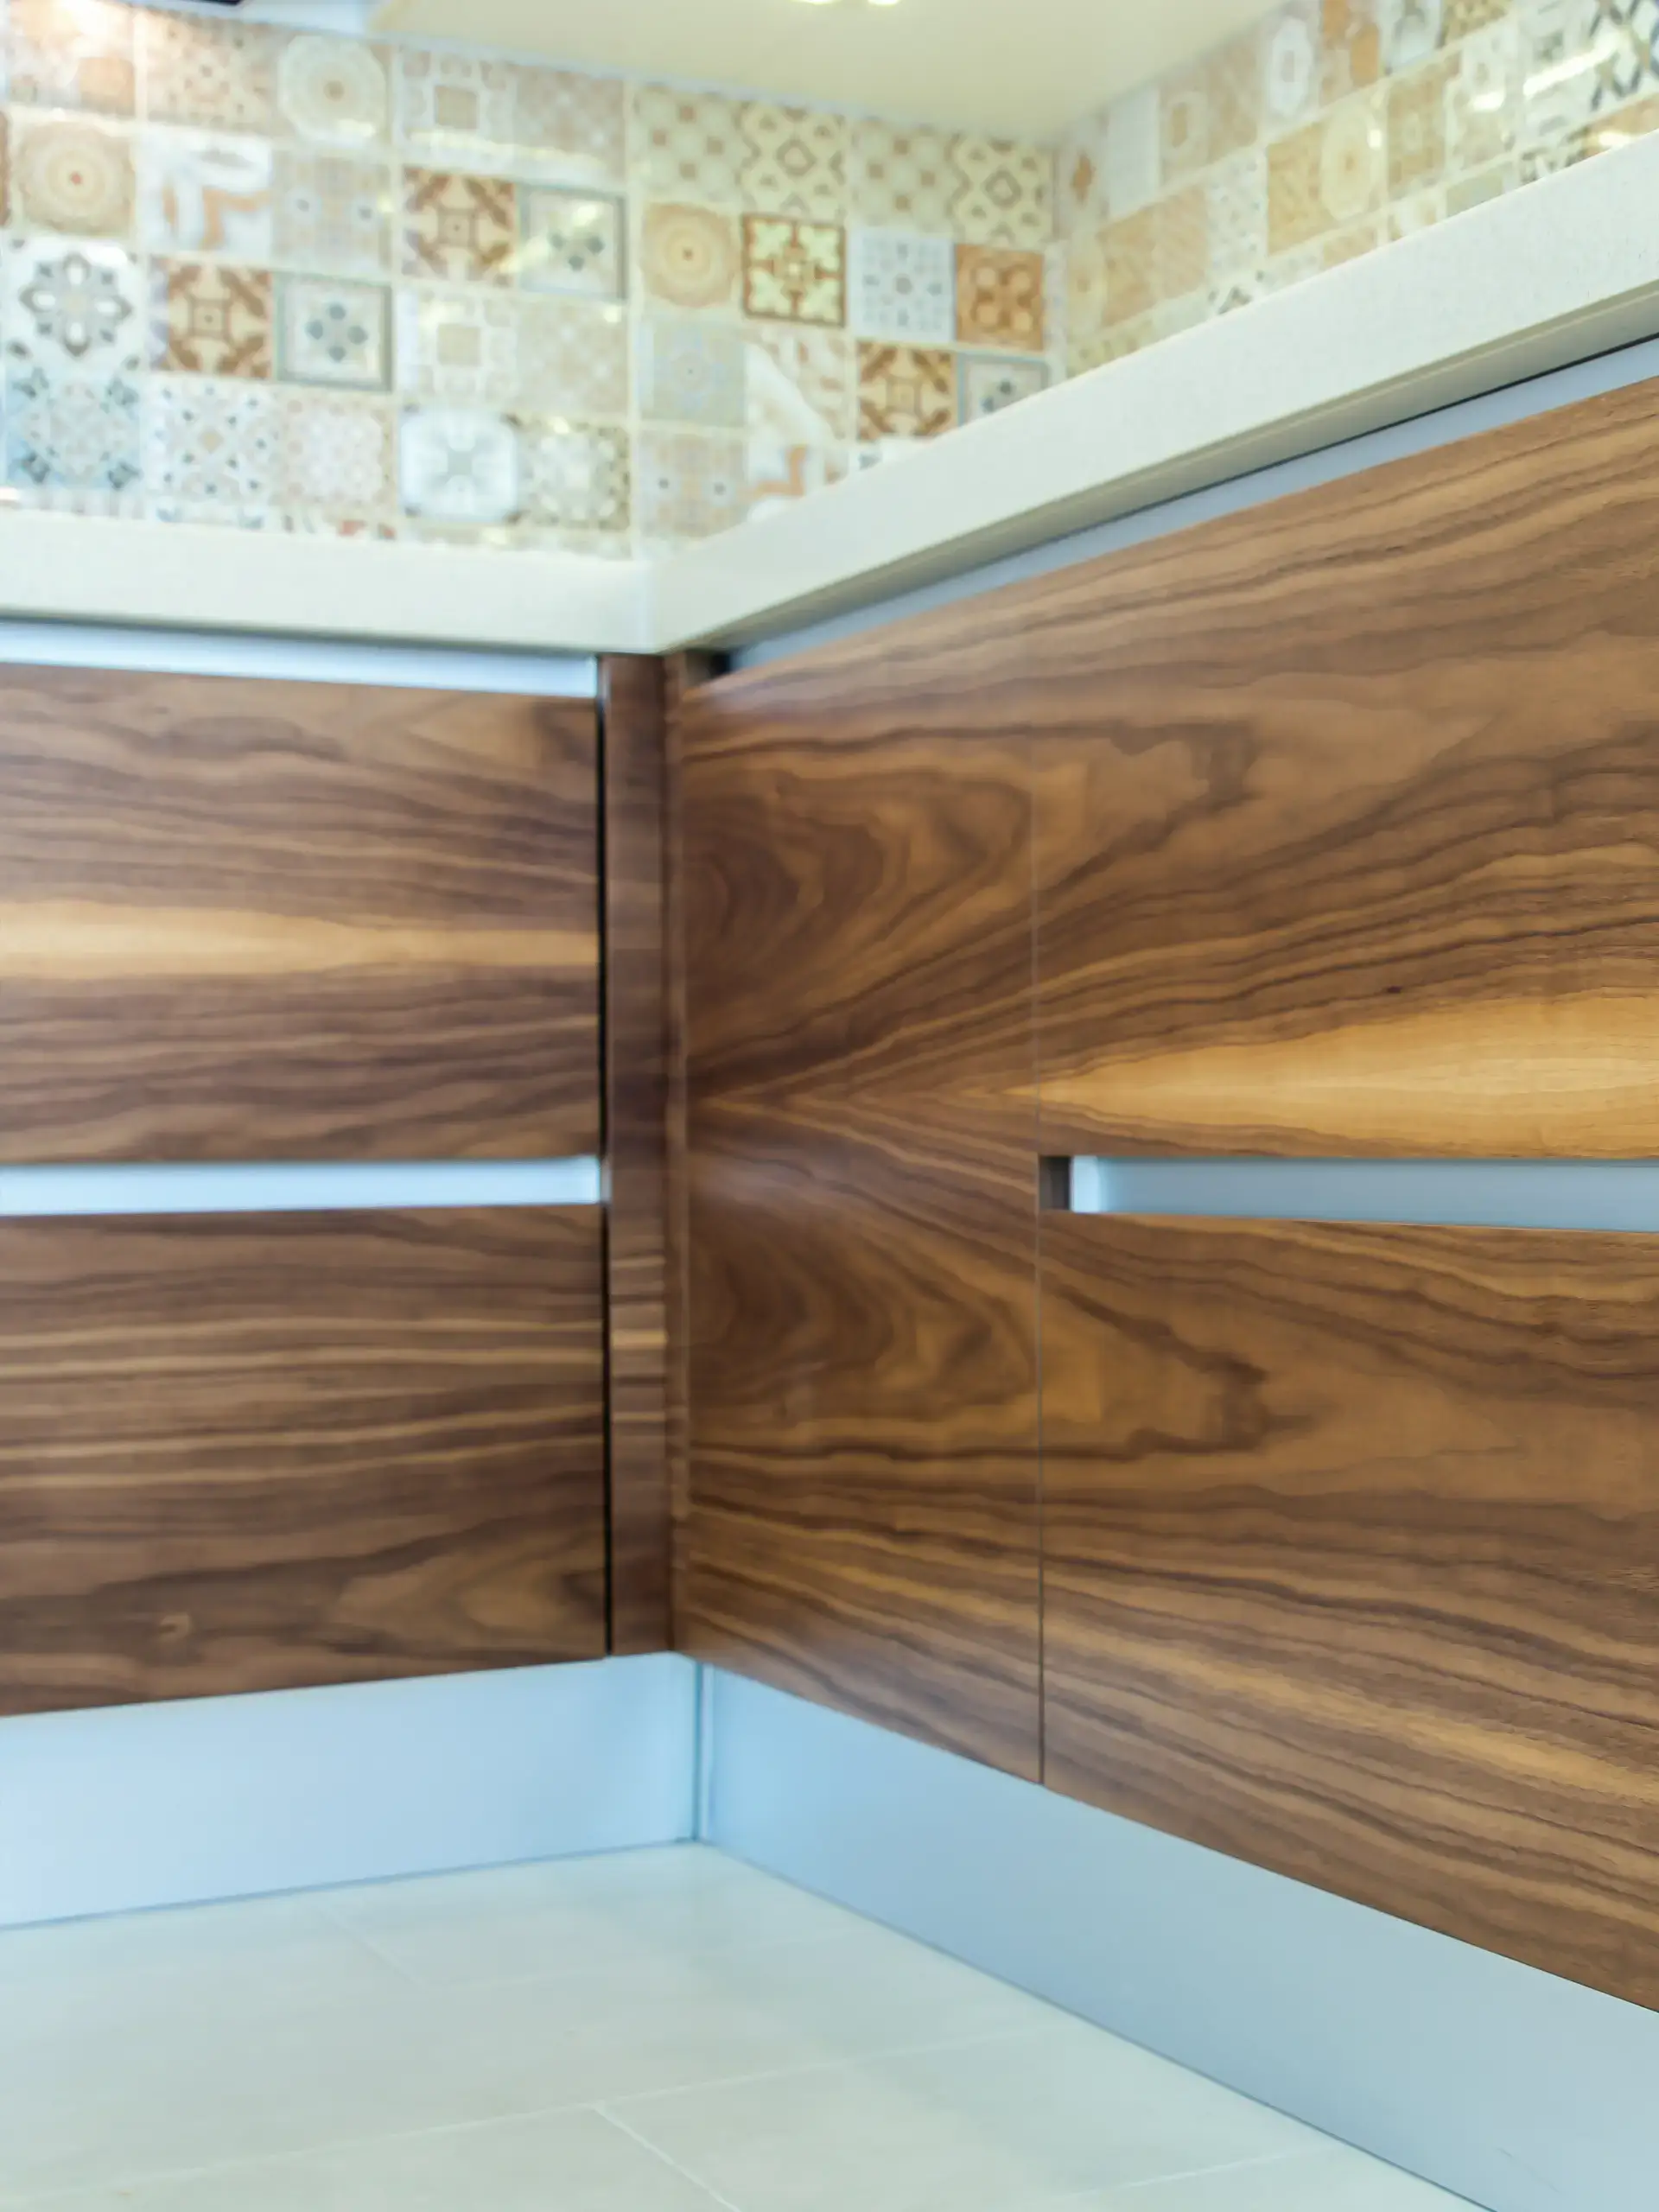 Cabinet Door Refinishing & Replacement Available in St. Louis, MO